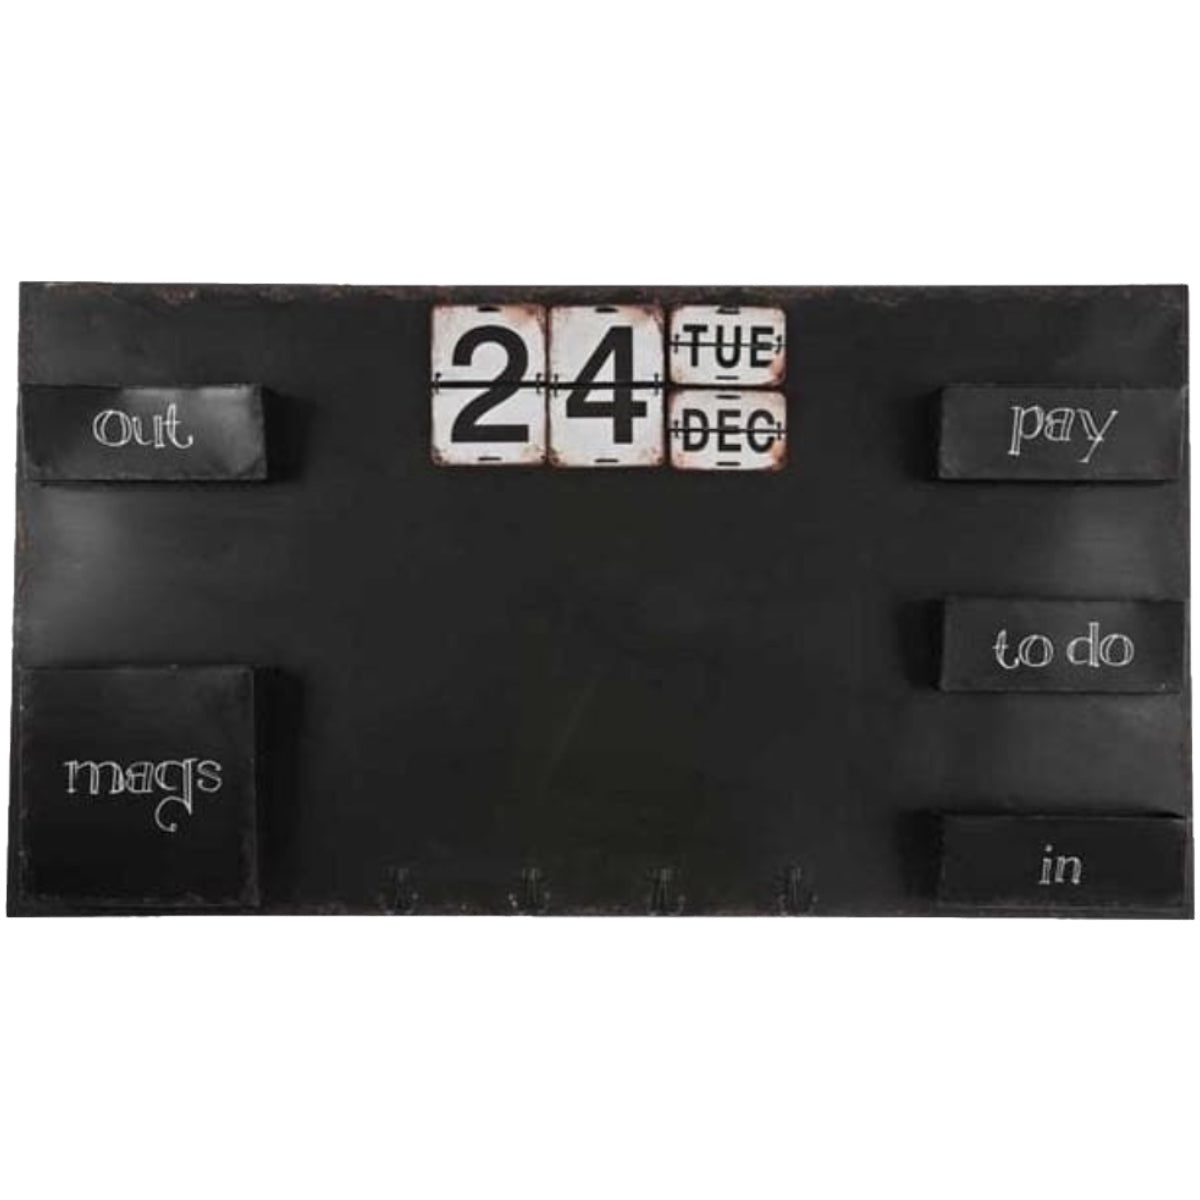 CAPTIVA Metal Black Board with Calendar and Trays, 120x65cm